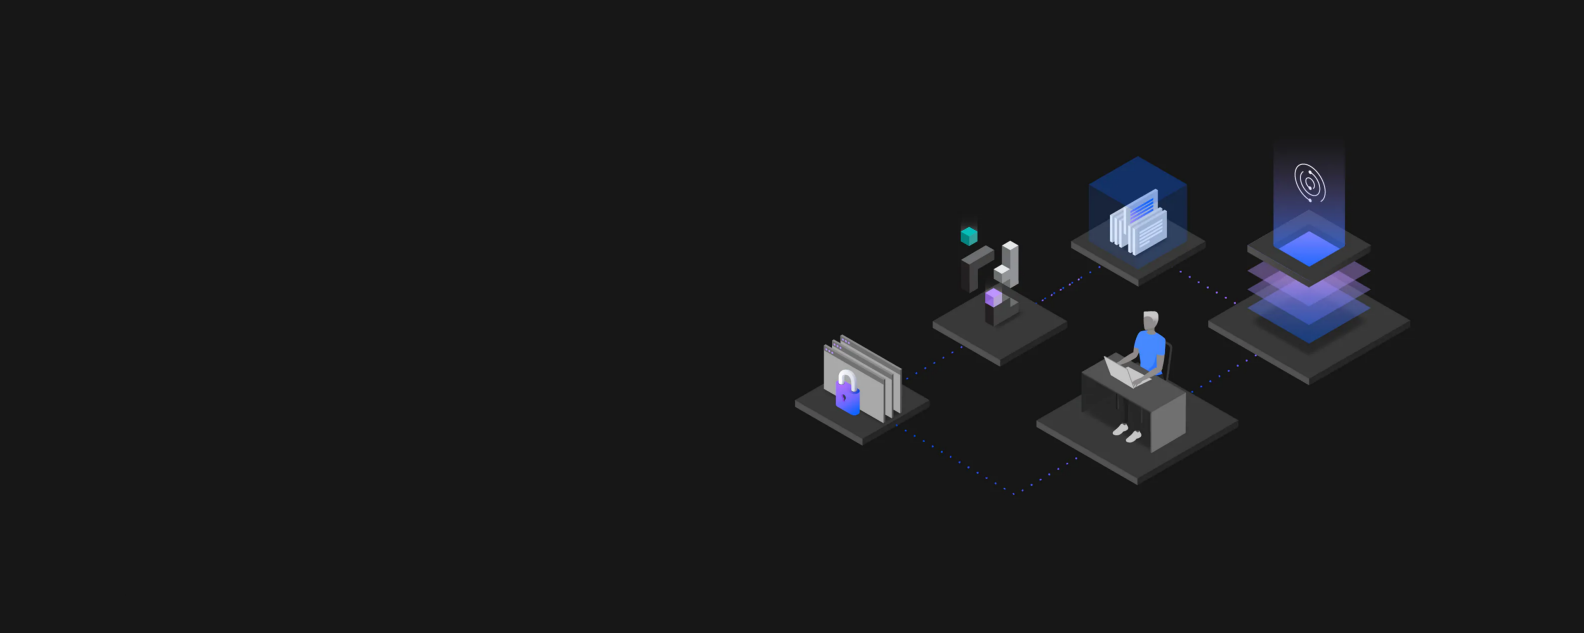 Isometric illustration for IBM Websphere Automation overview page